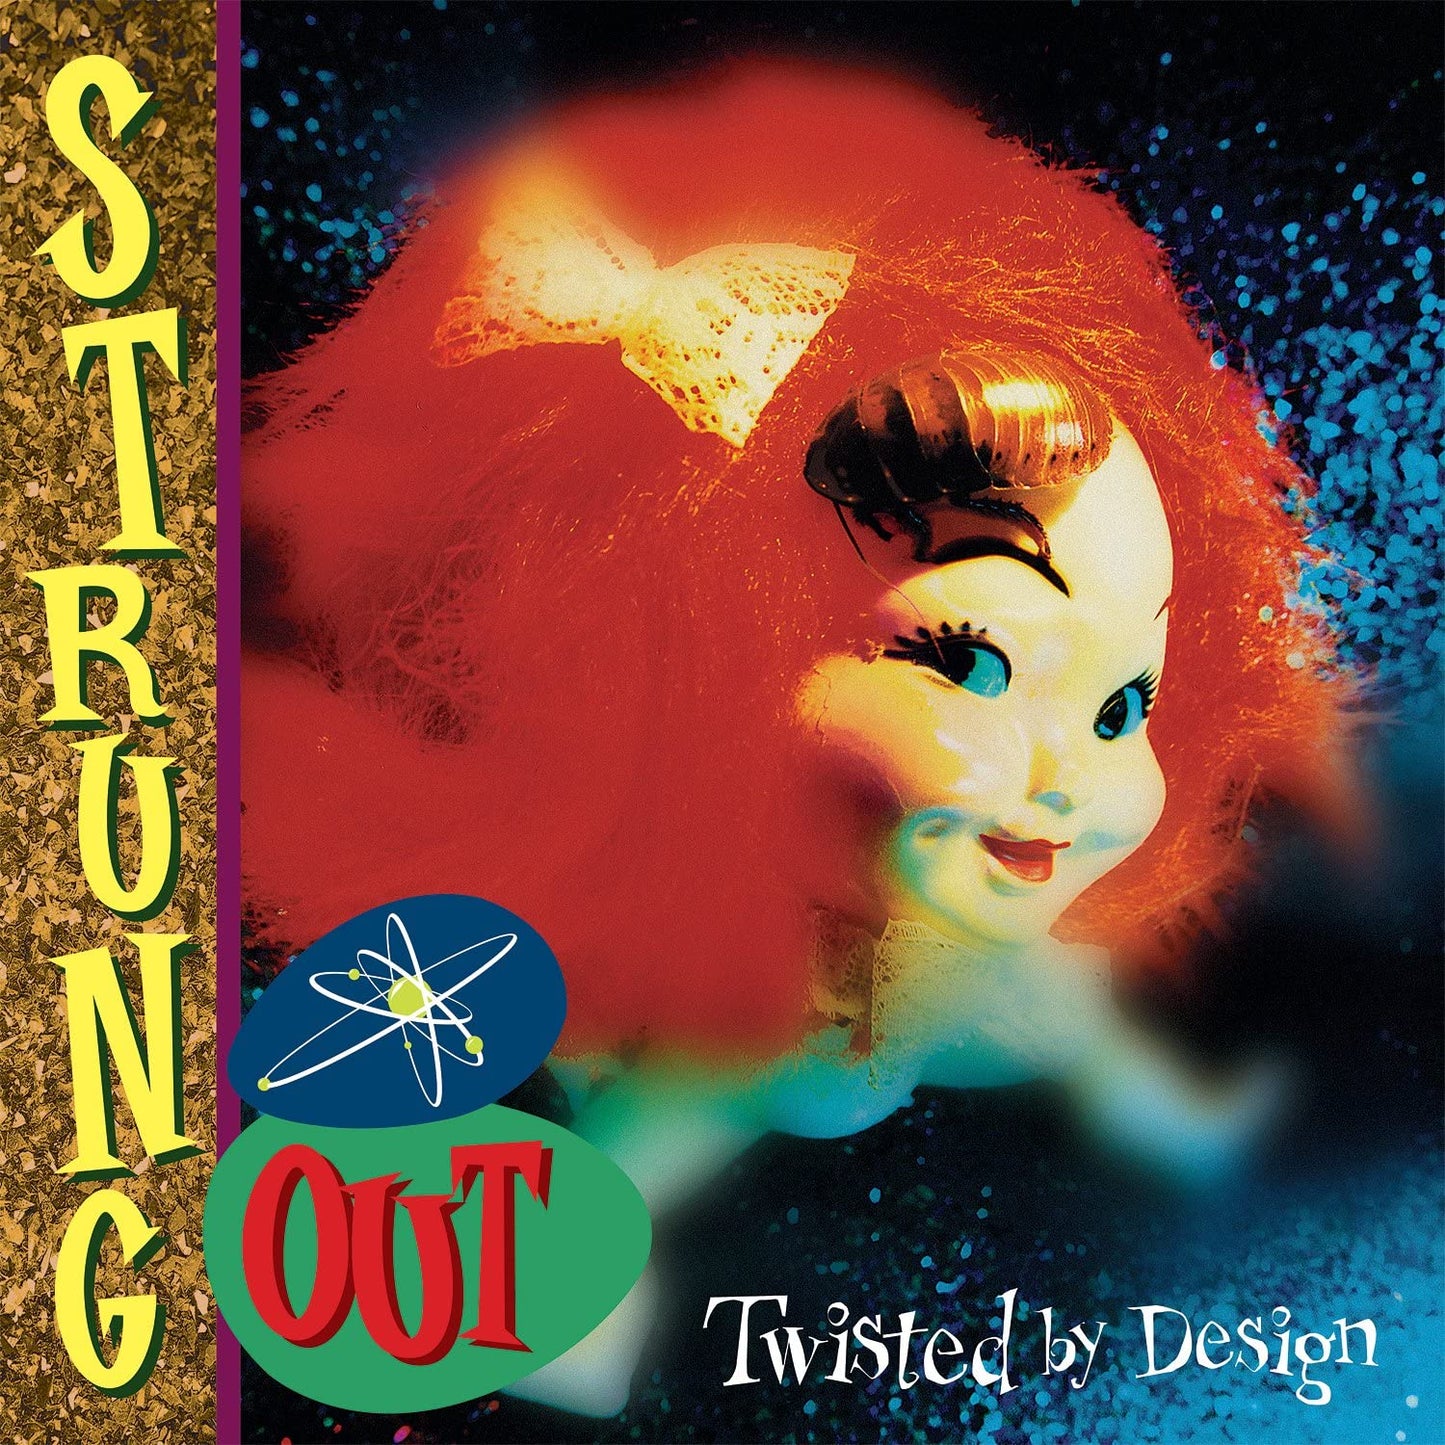 Strung Out/Twisted By Design [LP]